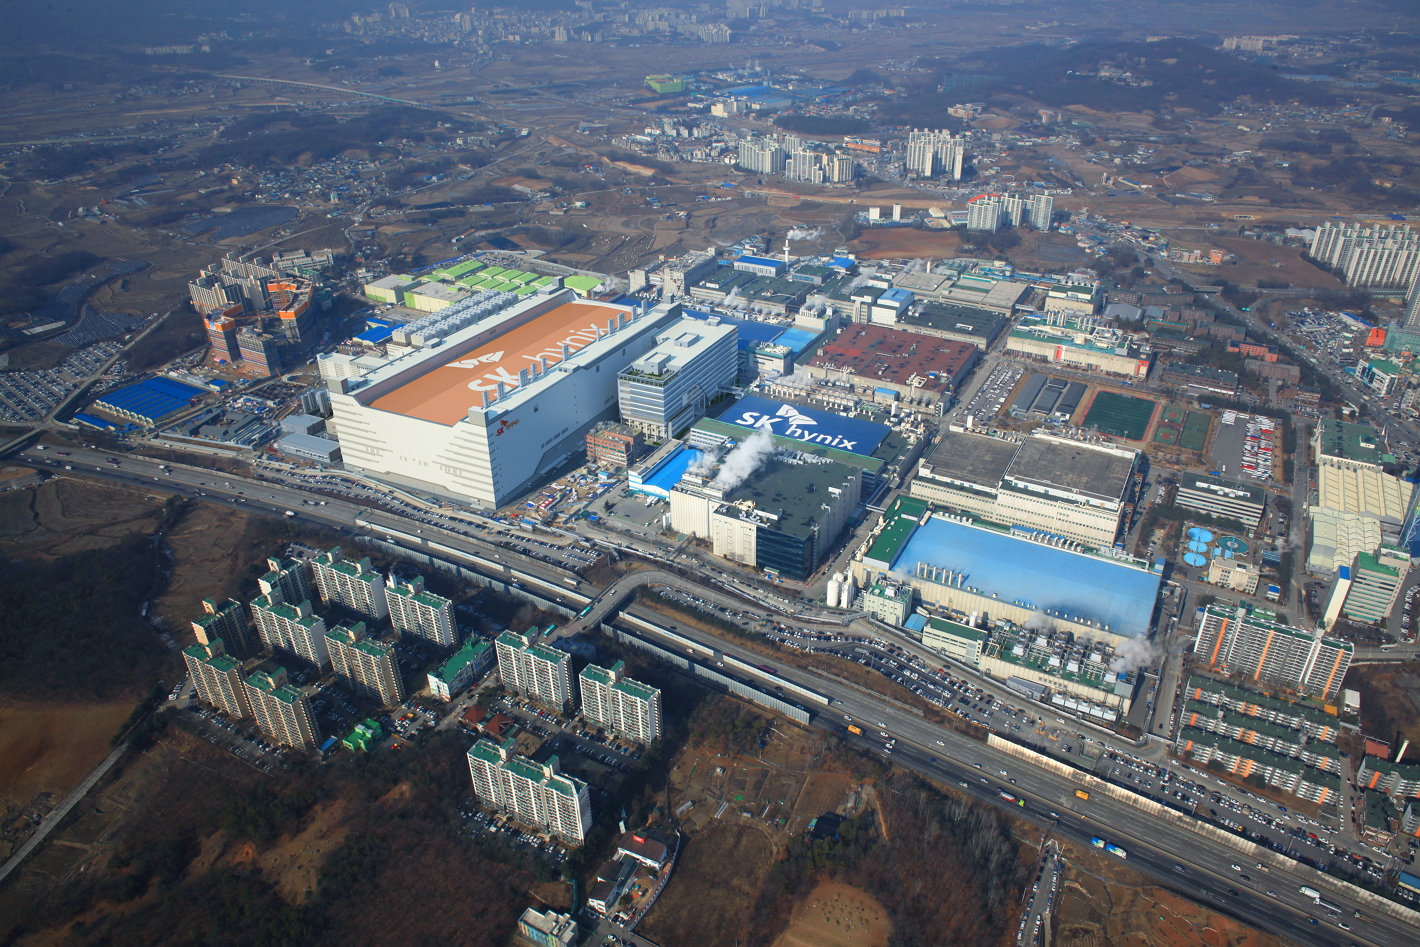 SK Hynix Icheon Campus - The aerial view of SK Hynix logo on the rooftop depicts M14 facility